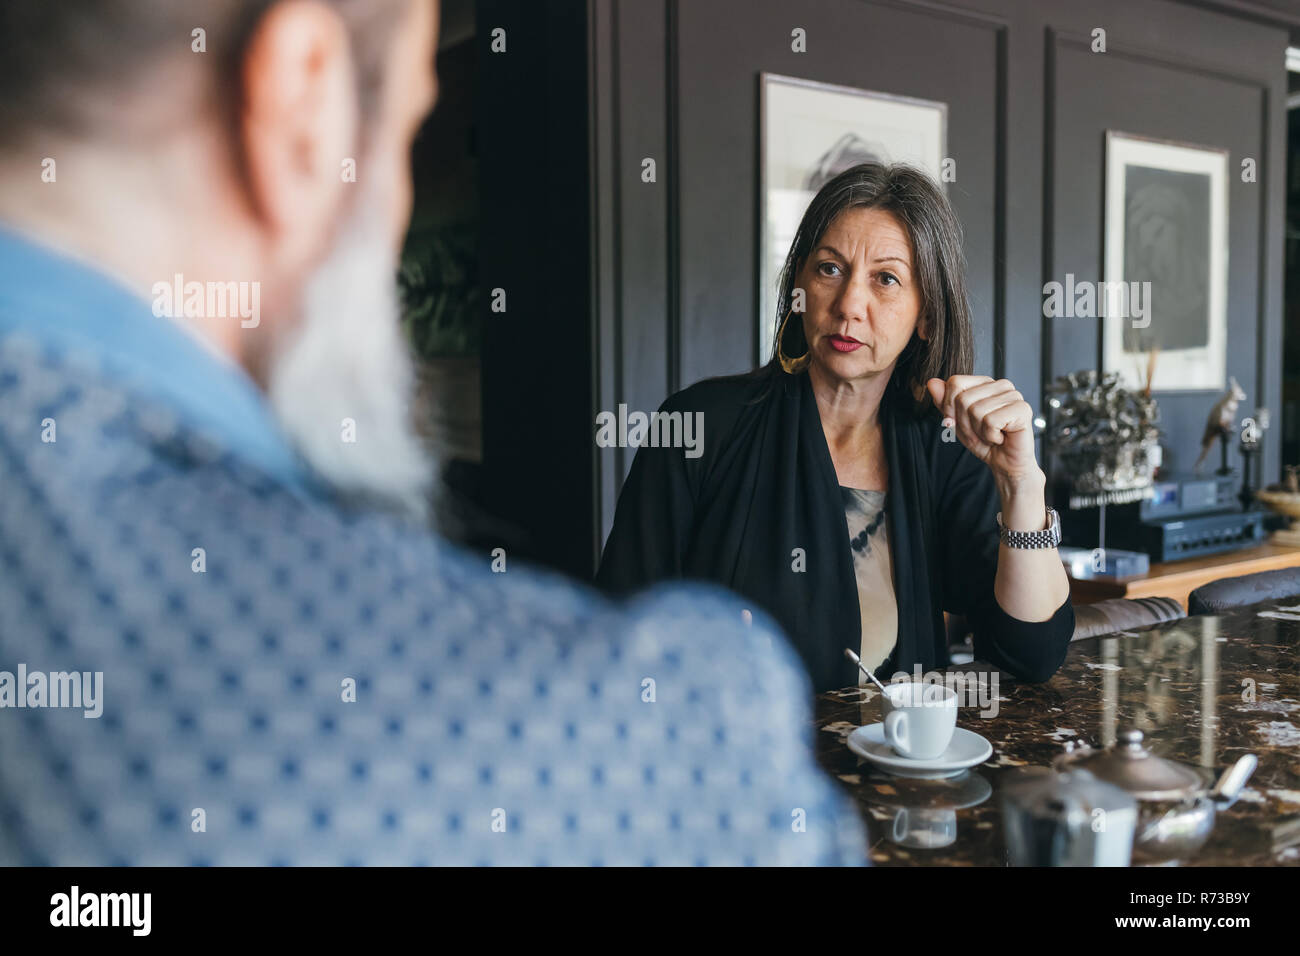 Couple in discussion over coffee in kitchen Stock Photo